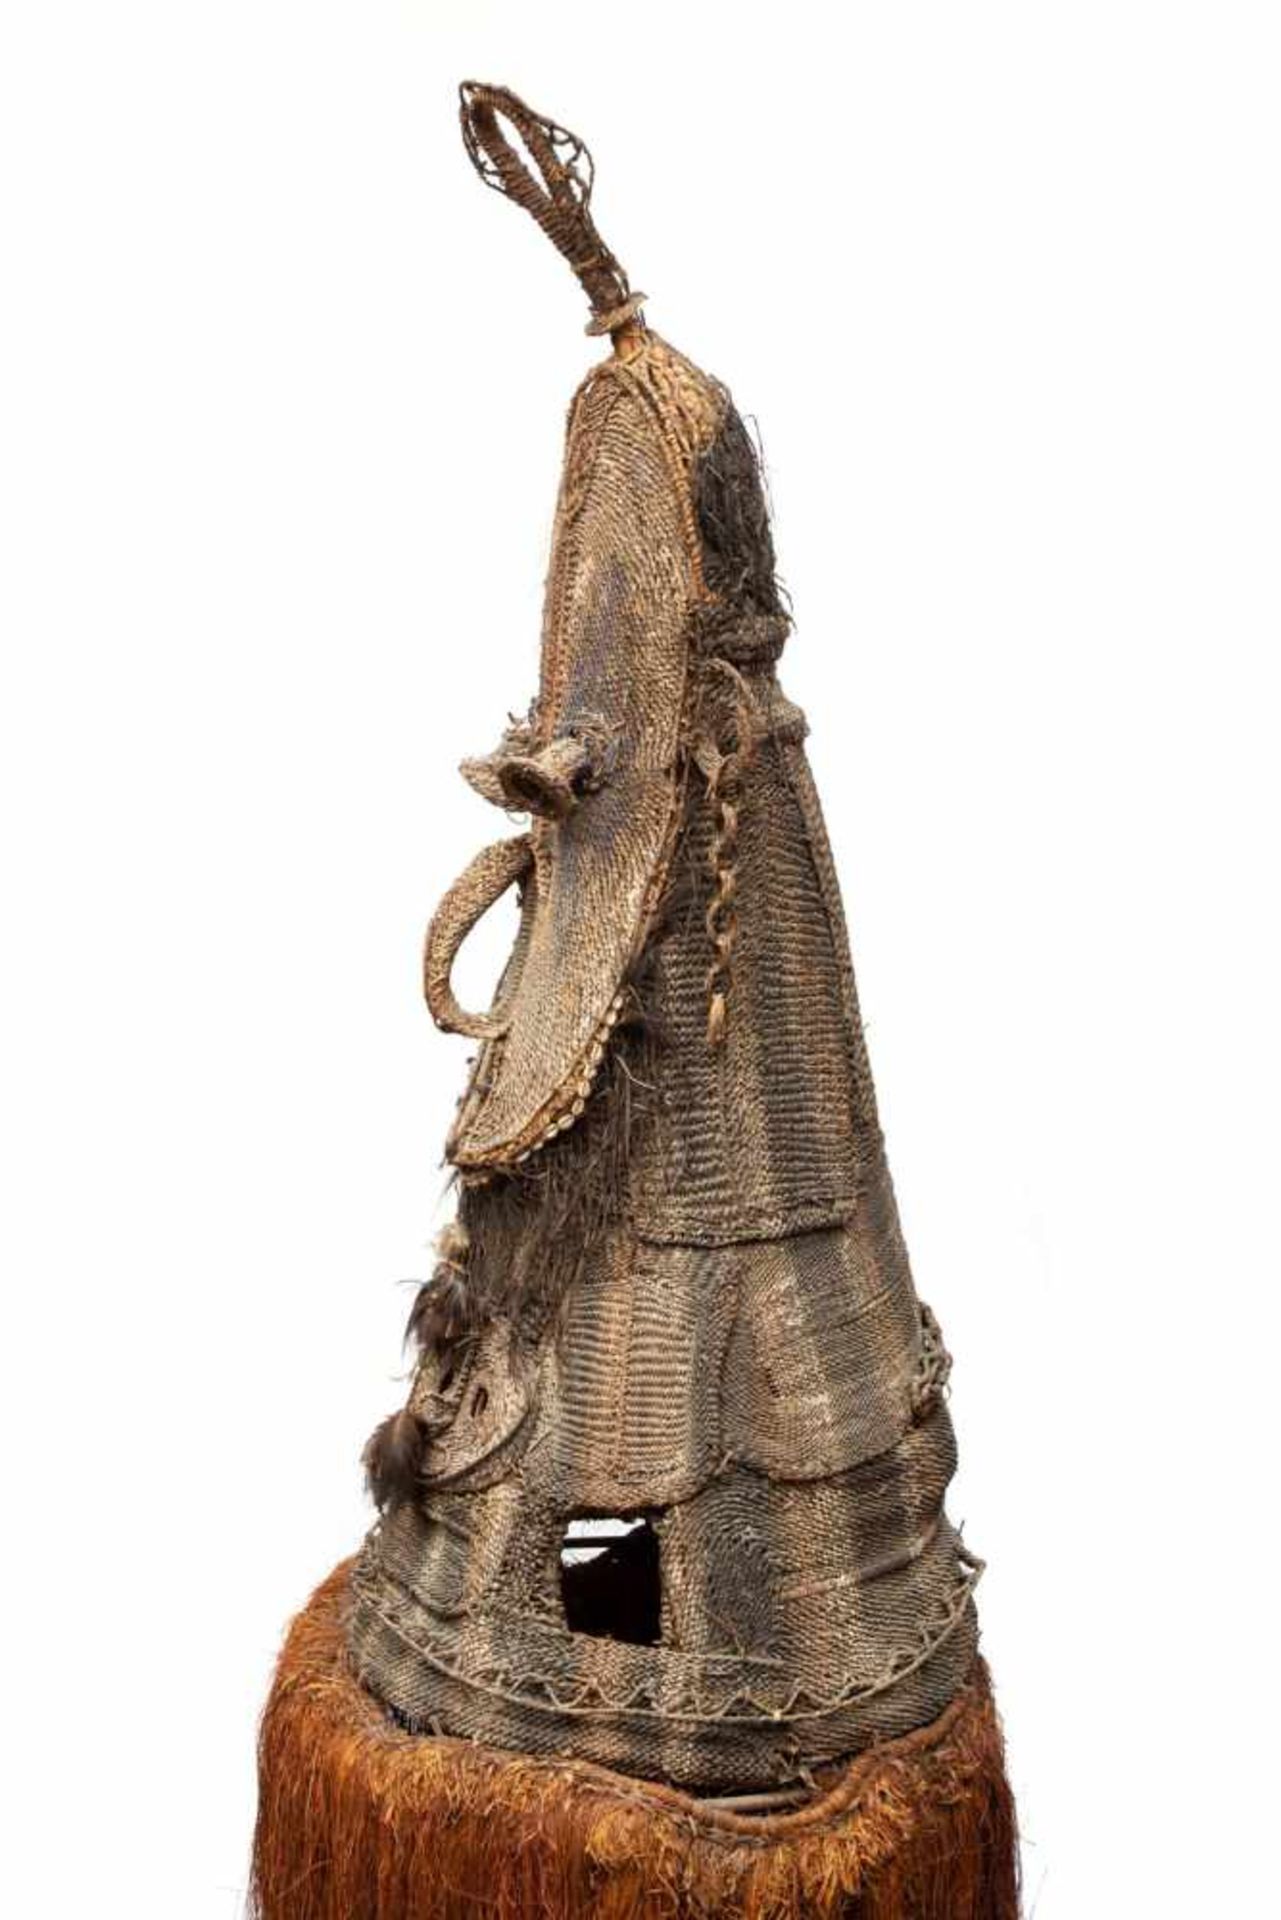 PNG, Yatmul, plated rattan body mask with two heads, embellished with cowrie, feathers and plant